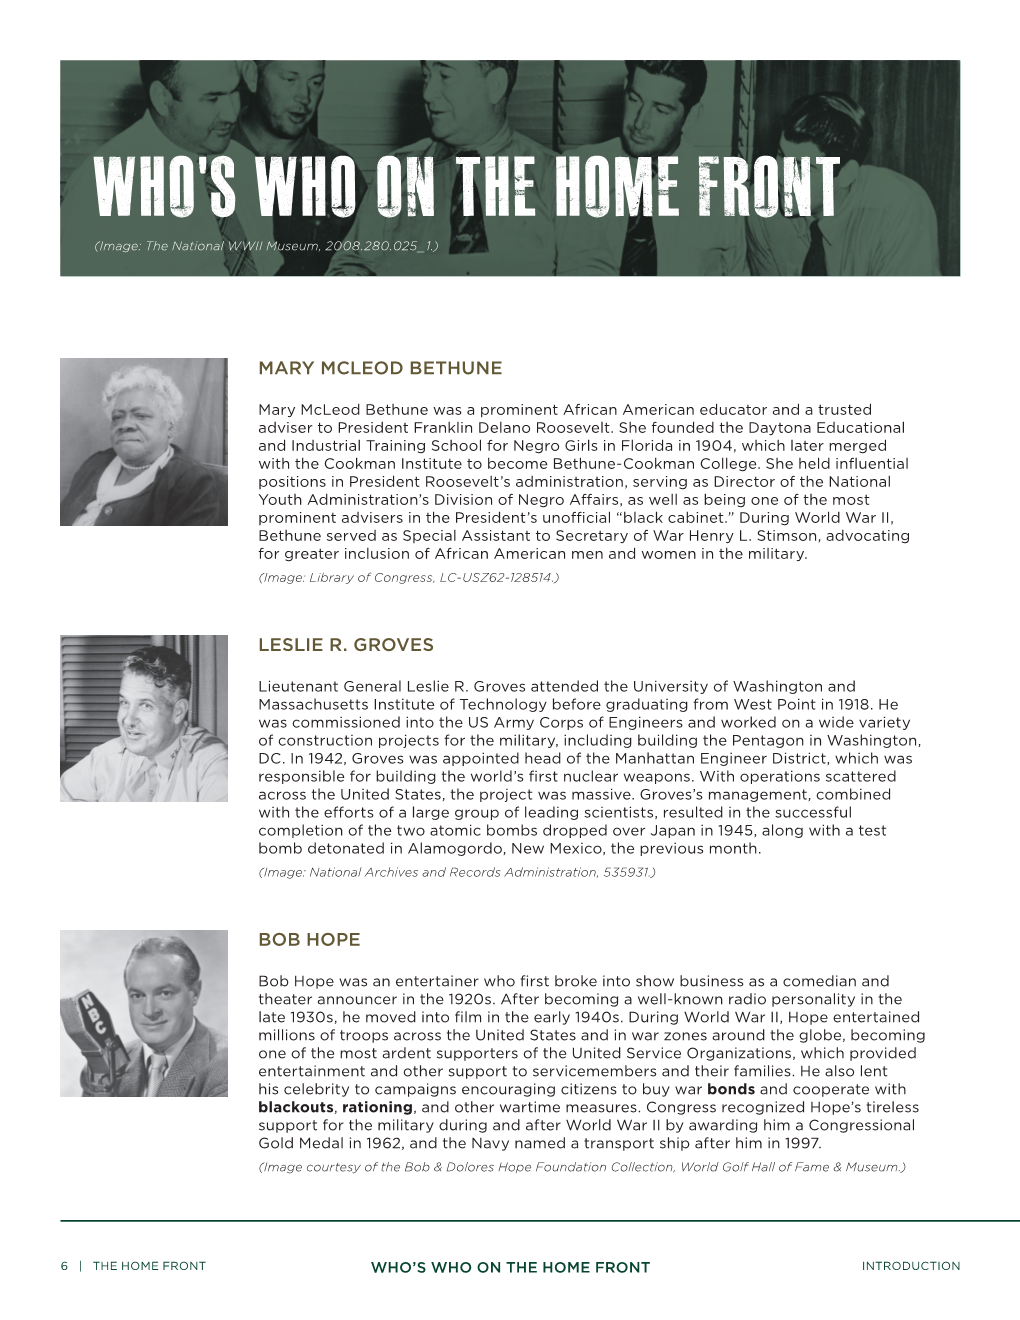 Who's Who on the Home Front